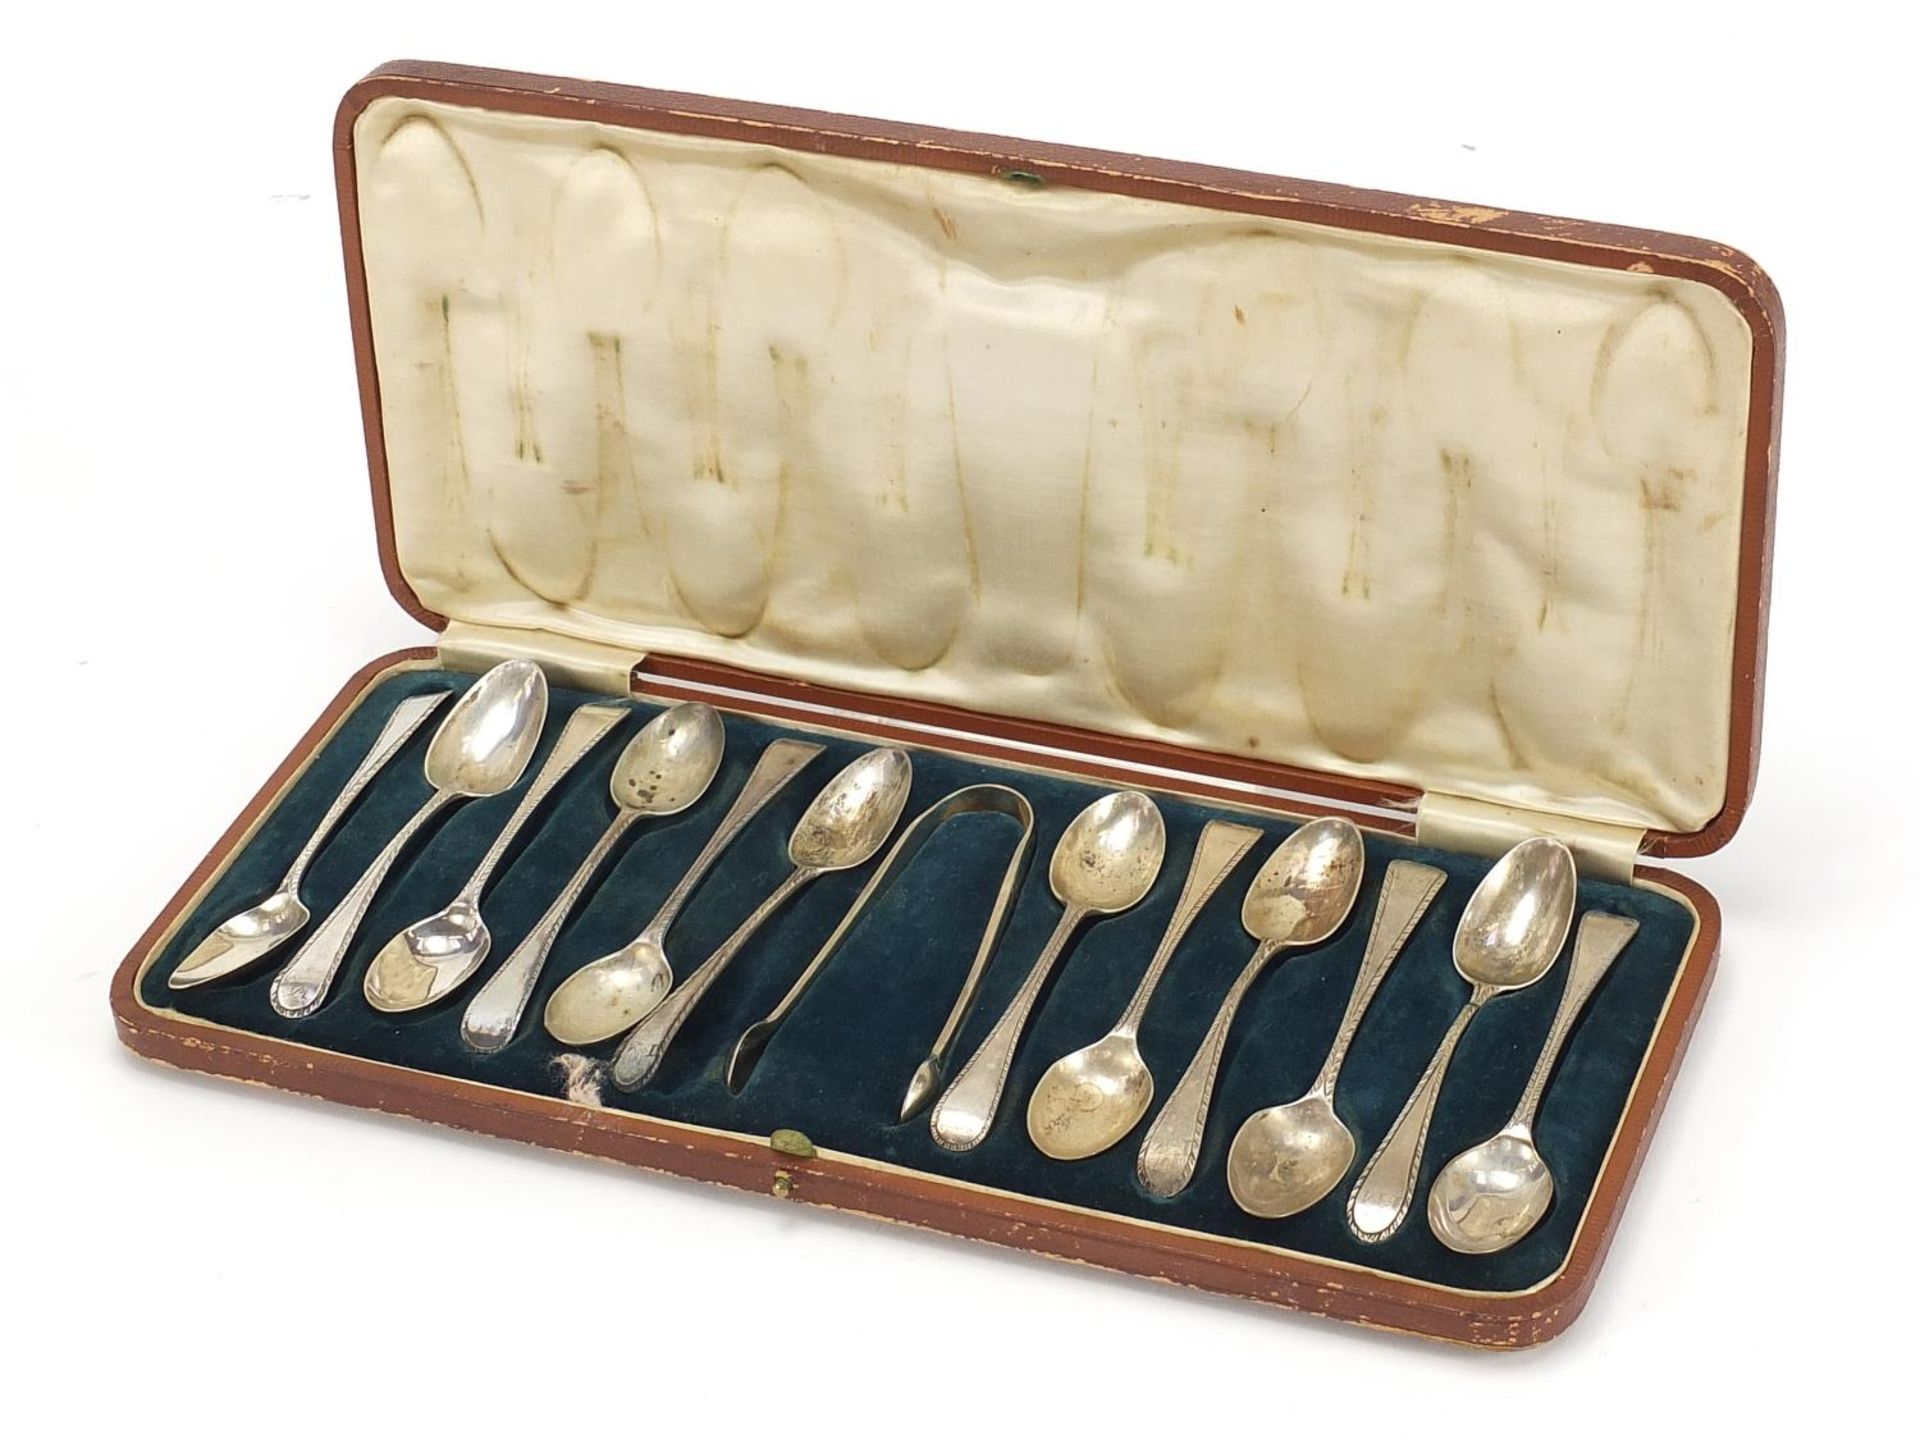 Matched set of twelve silver teaspoons and silver plated sugar tongs housed in a velvet and silk